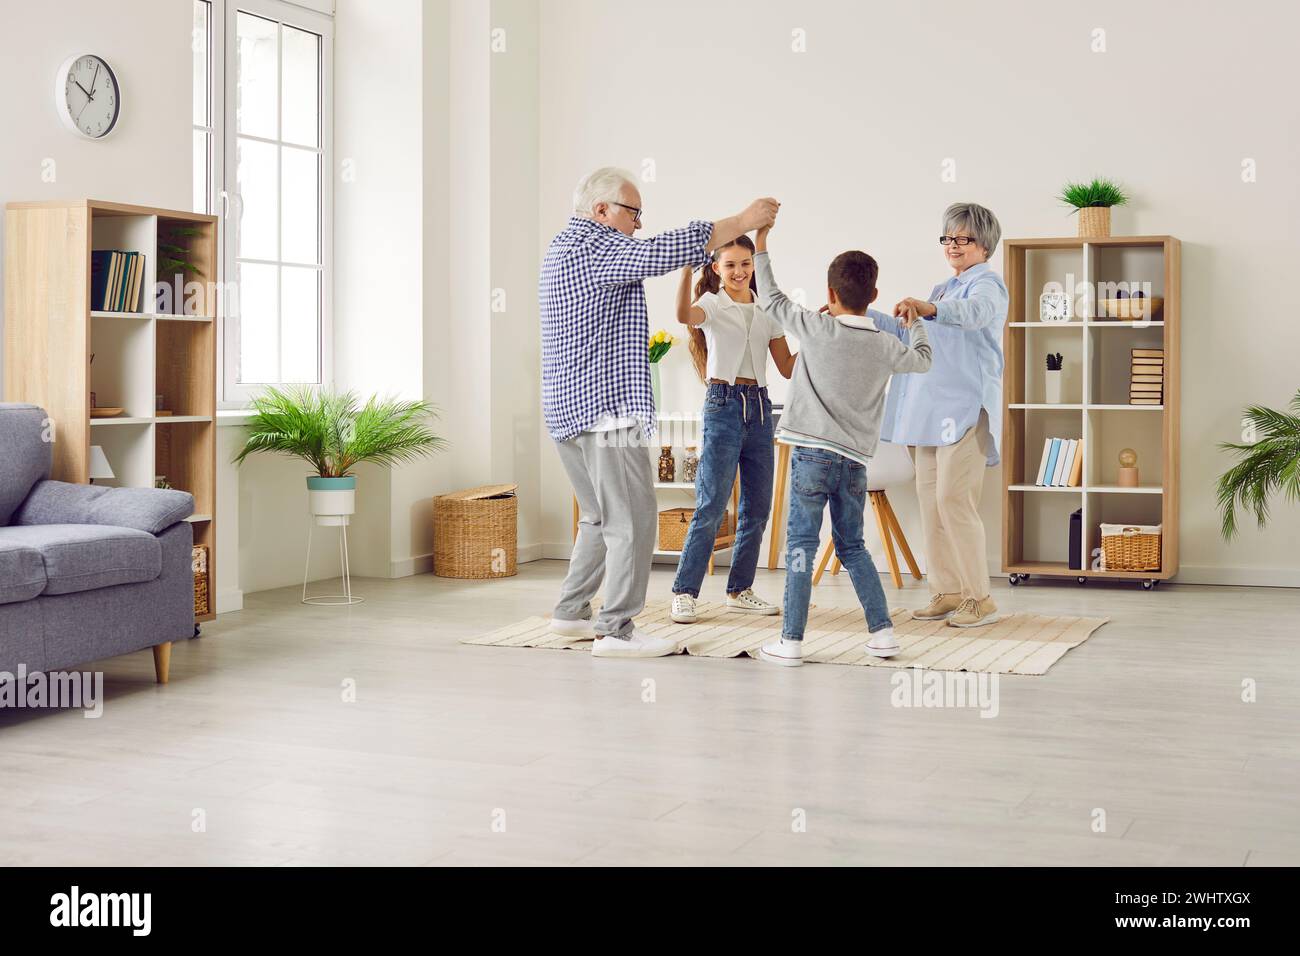 Happy children and grandparents dancing and having fun in the living room at home Stock Photo